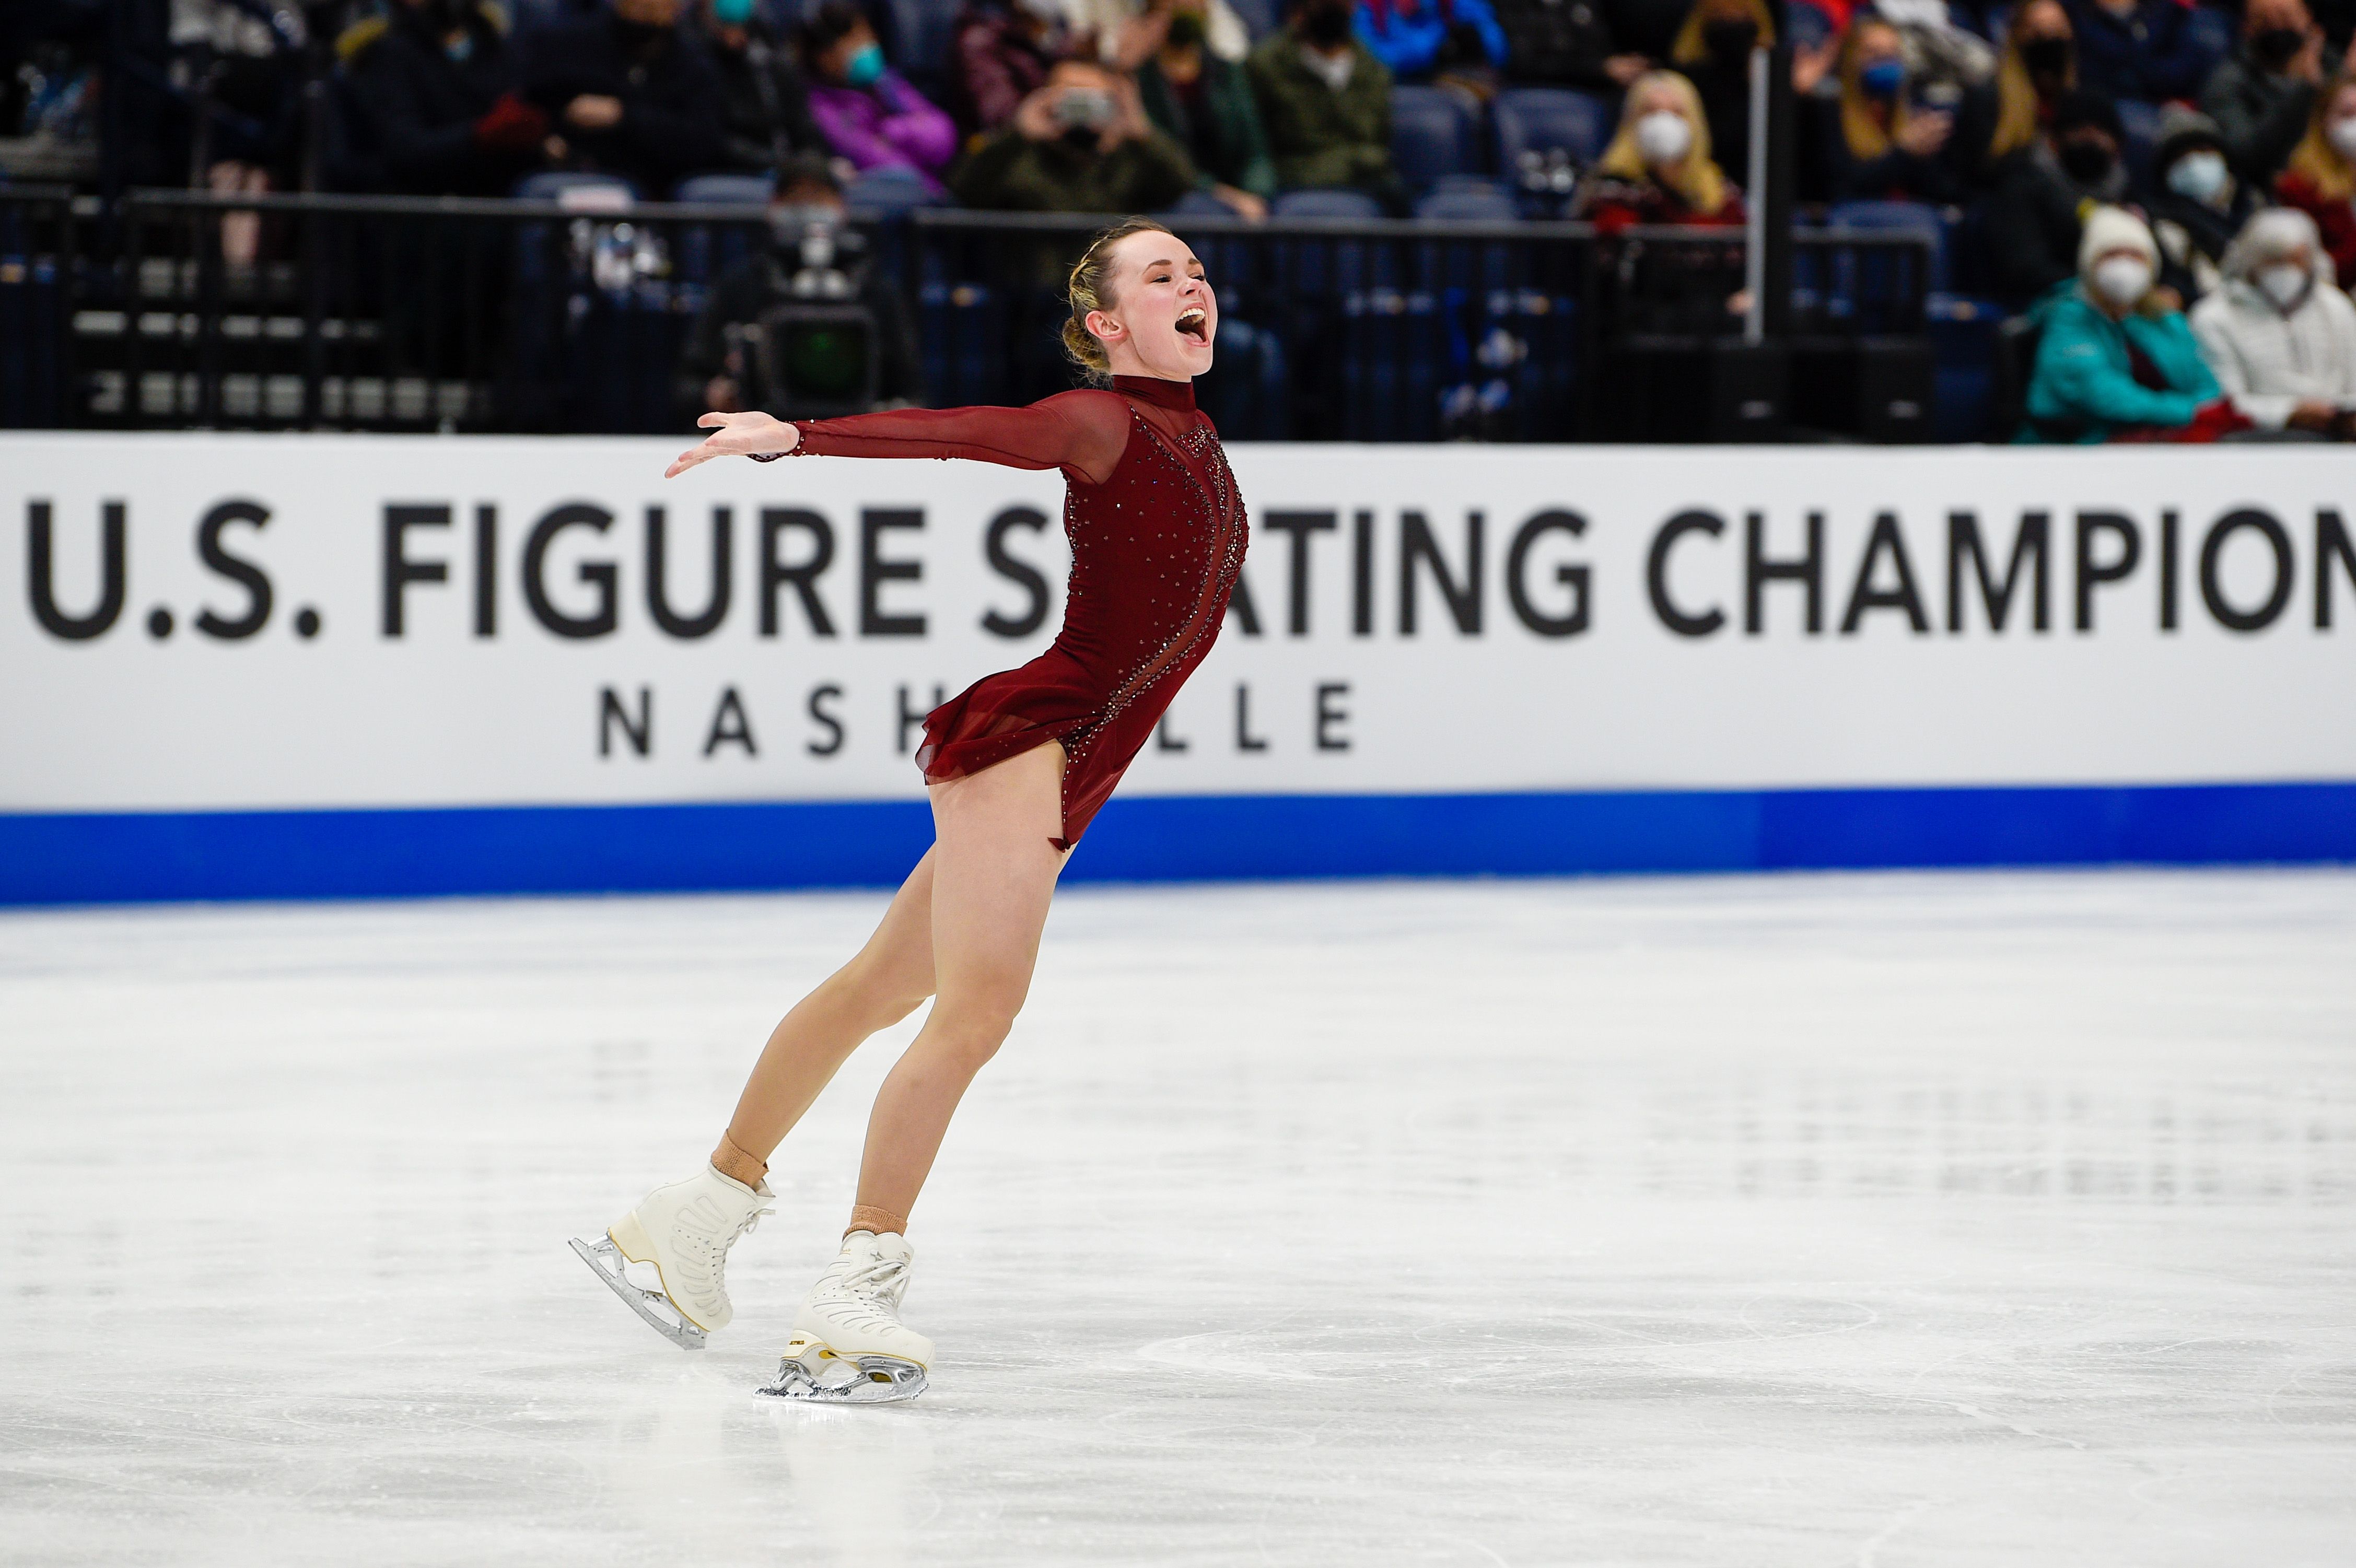 How and When to Watch Figure Skating at The 2022 Winter Olympics